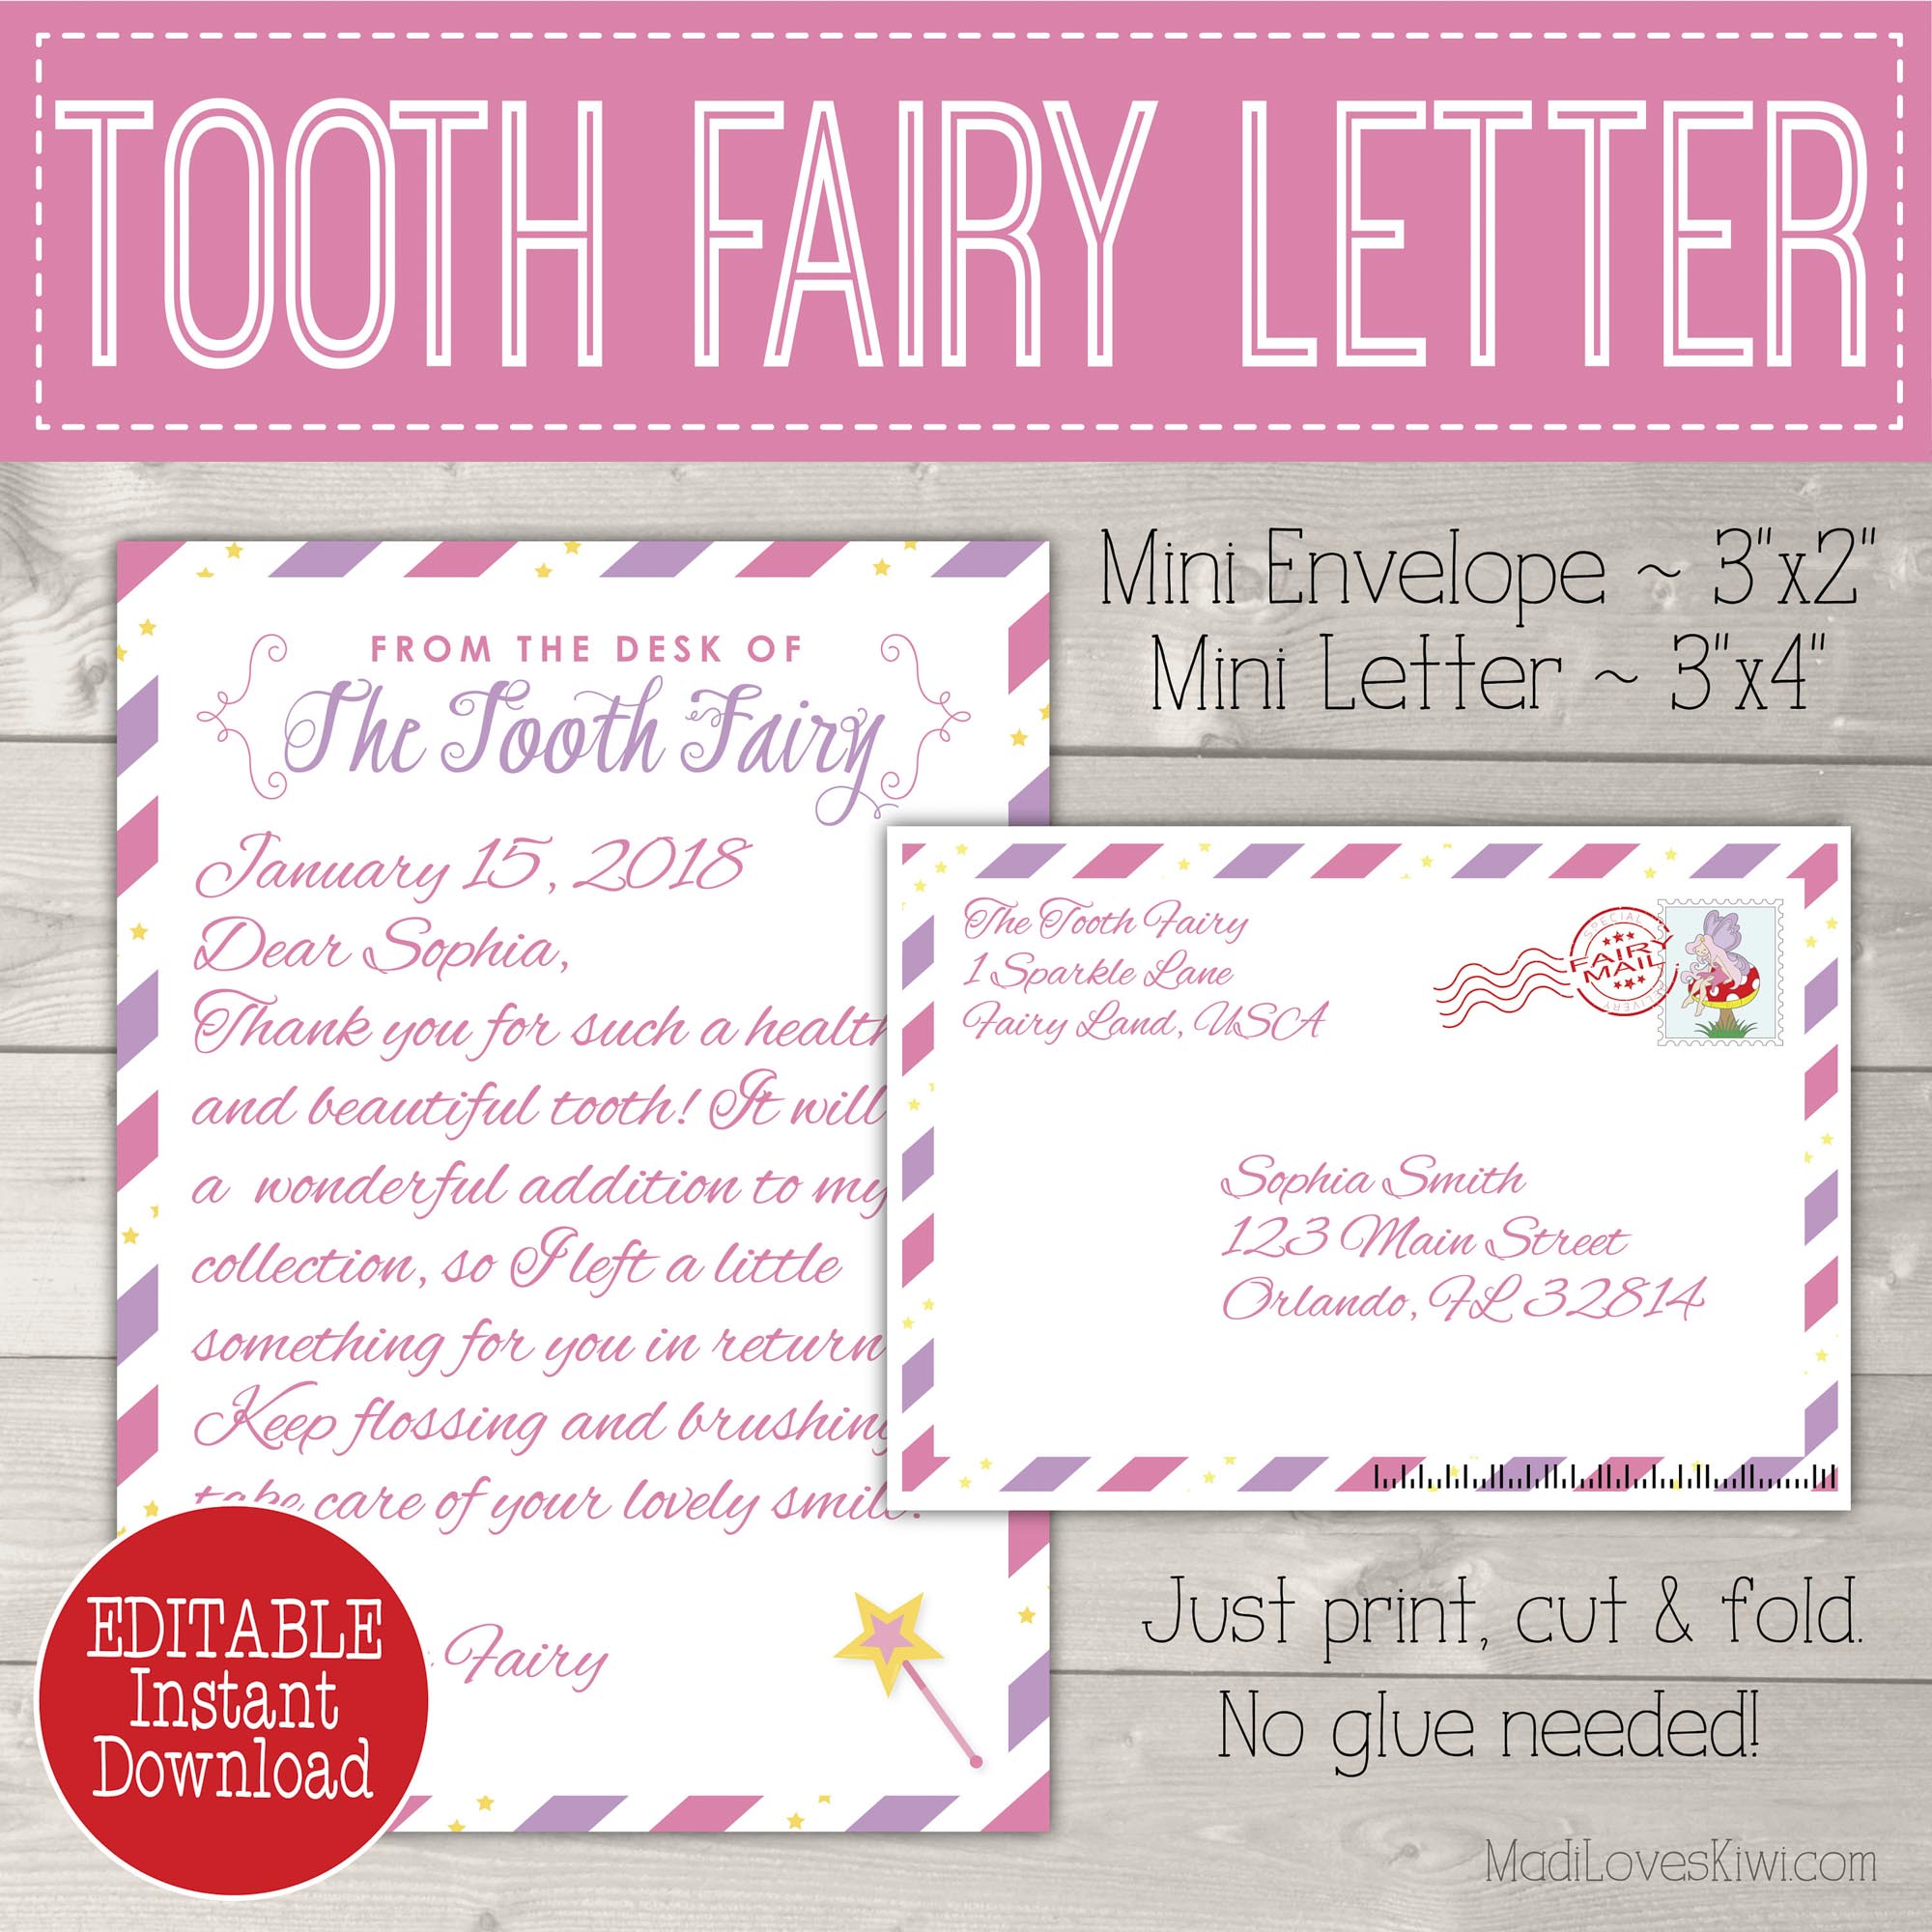 Tooth Fairy Letter Template Free Download